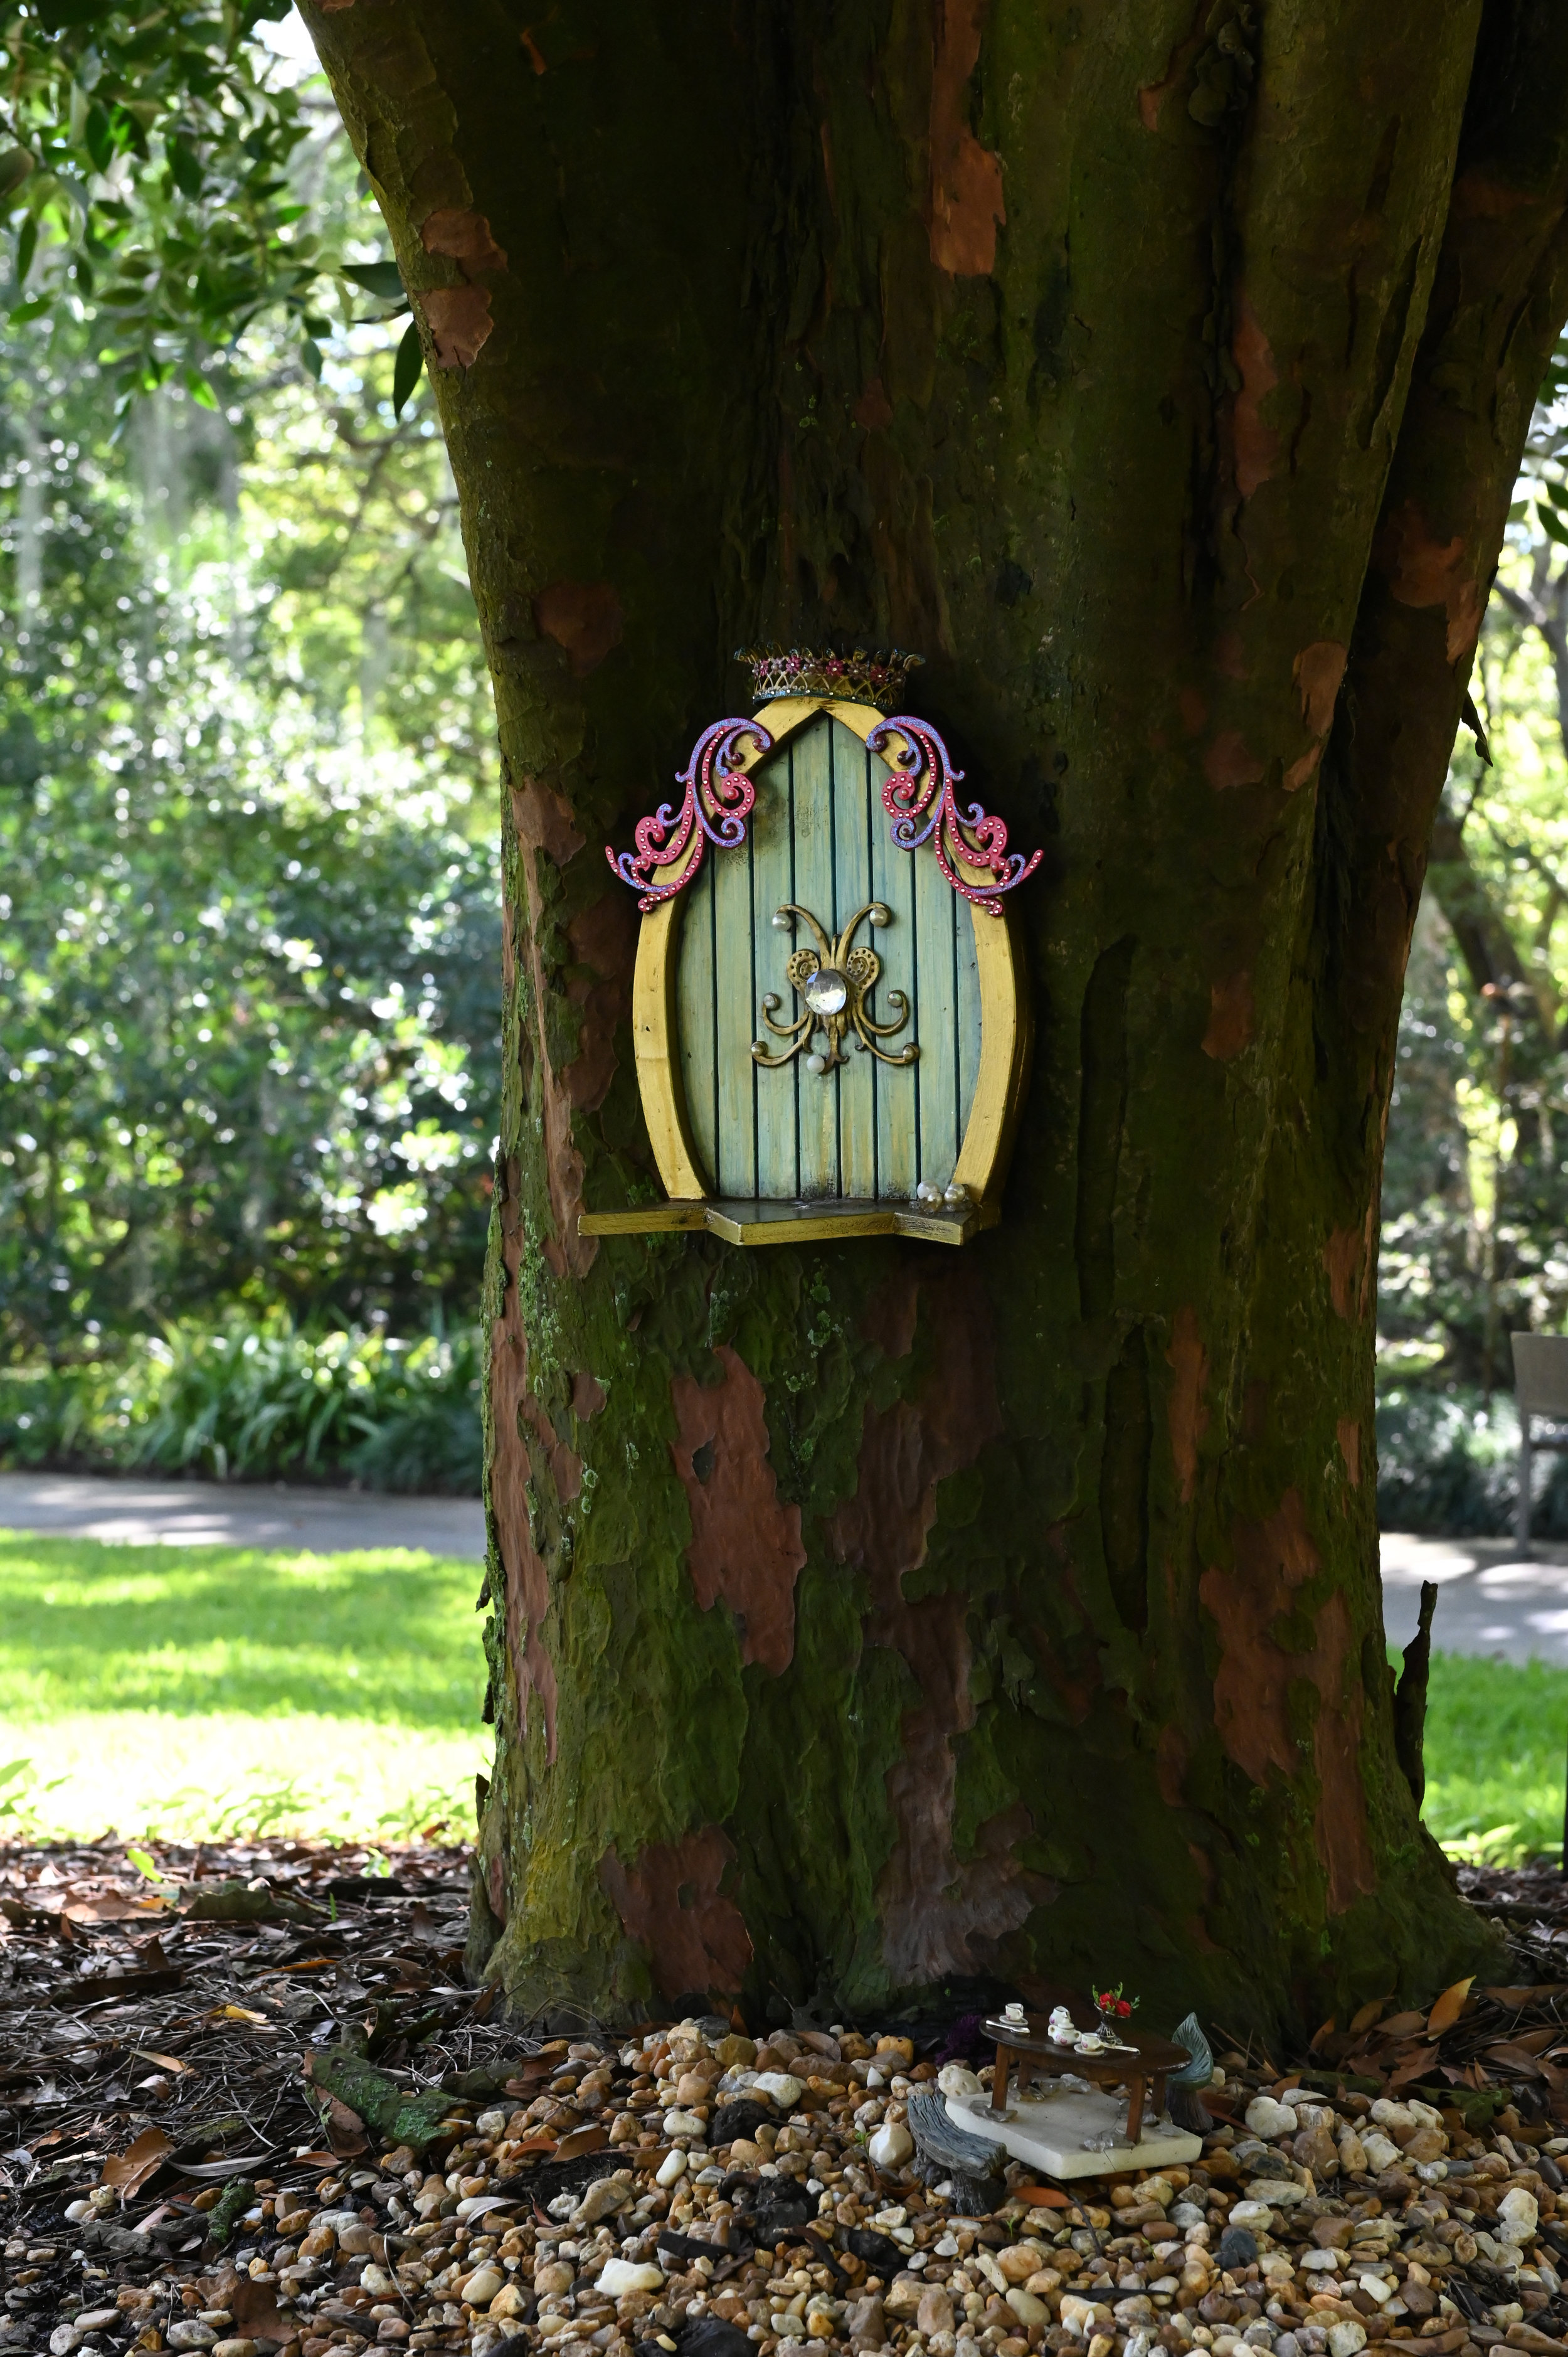 The fairy for this door is named Shaylee, which means harmony. She is a fairy princess who keeps order and peace.